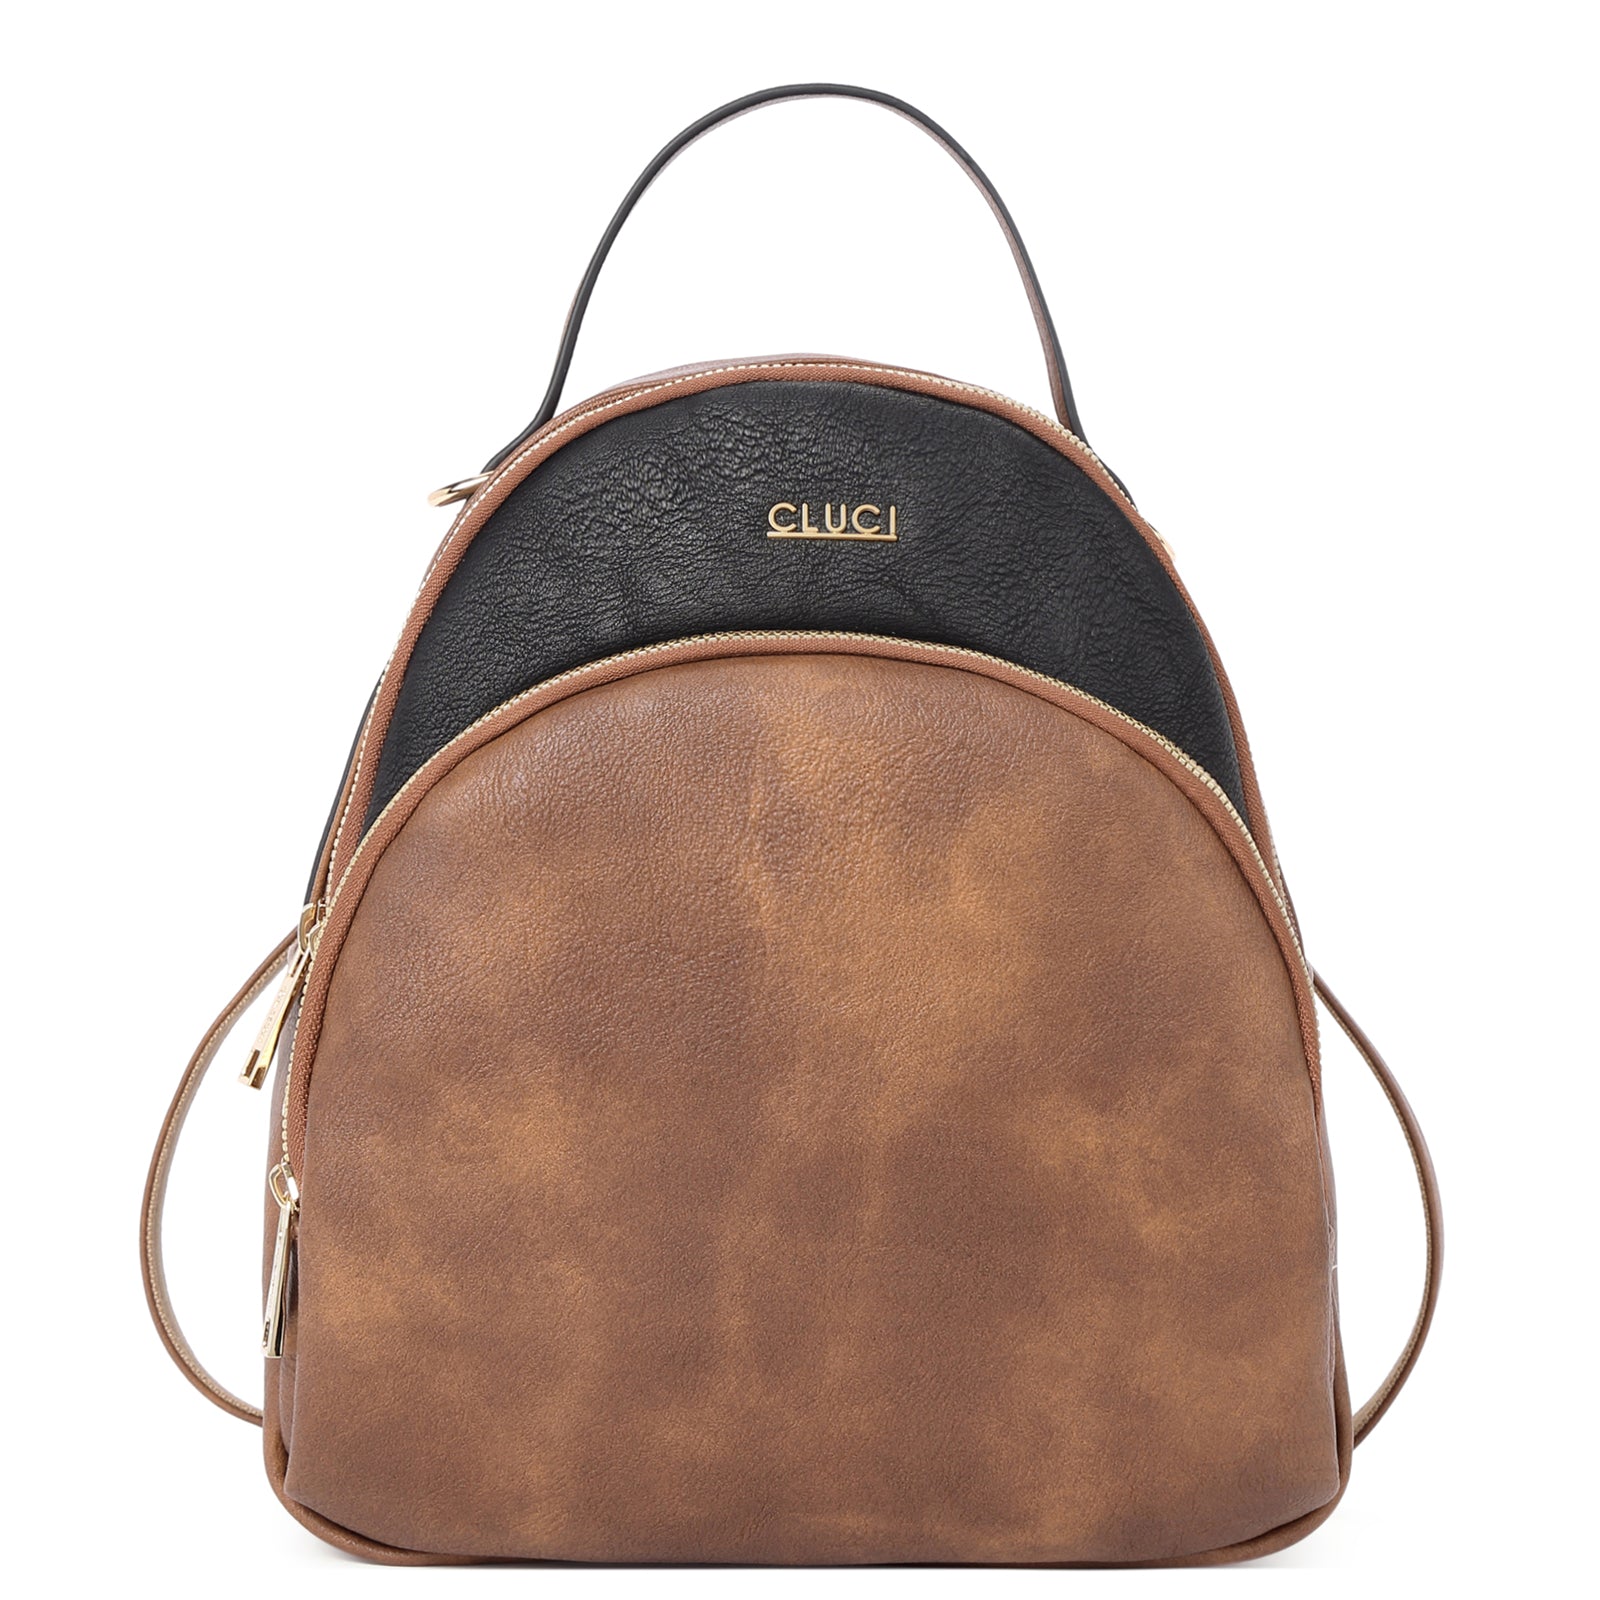 CLUCI Small Backpack Purse for Women Leather Shoulder Bags Lady Fashio